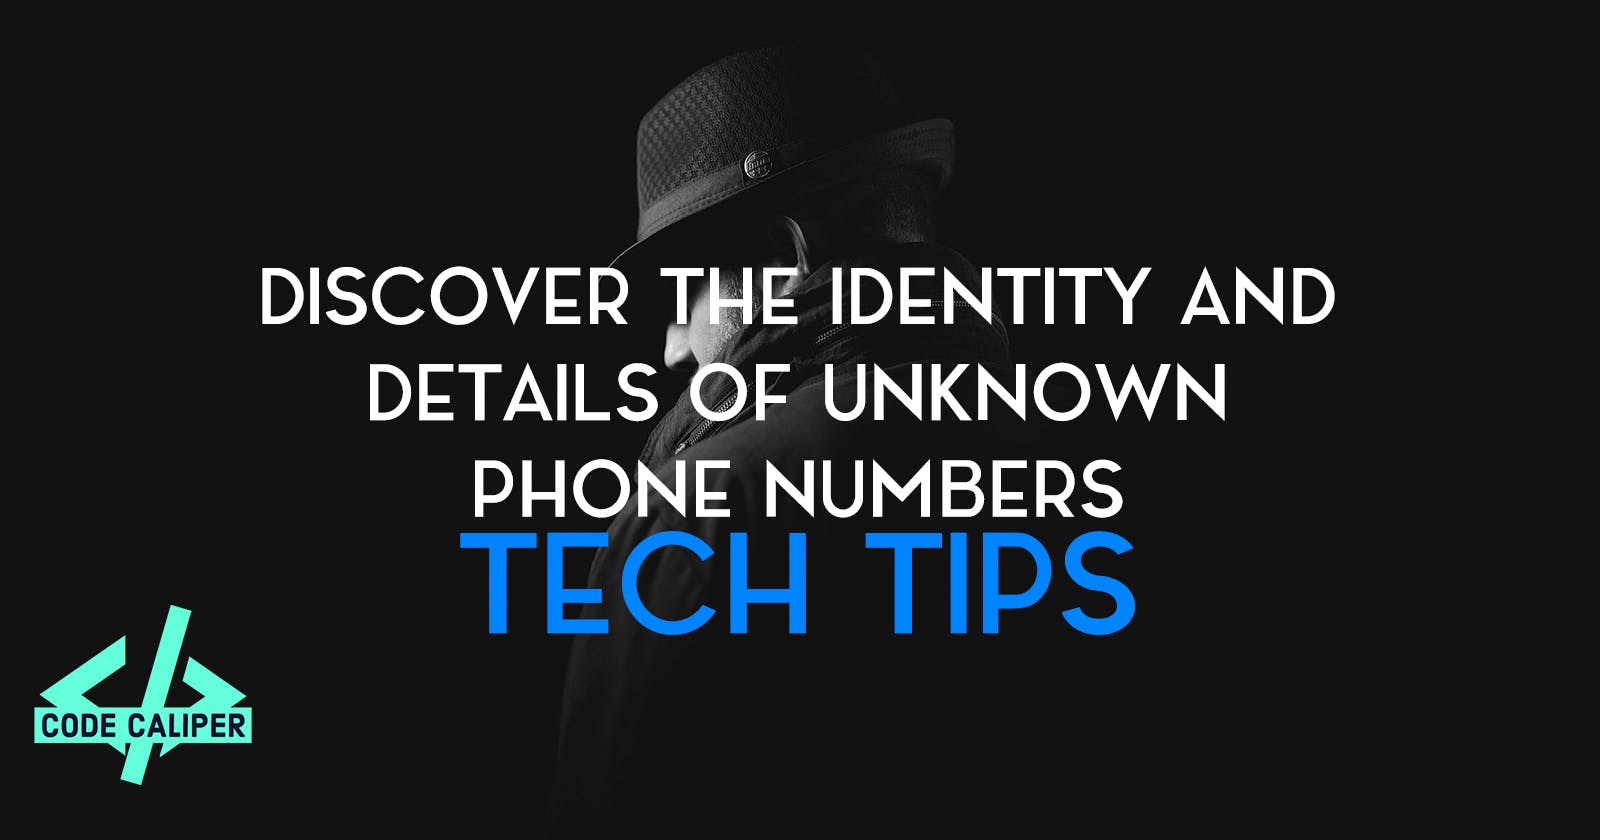 Discover the Identity and Details of Unknown Phone Numbers with PhoneInfoga on Kali Linux